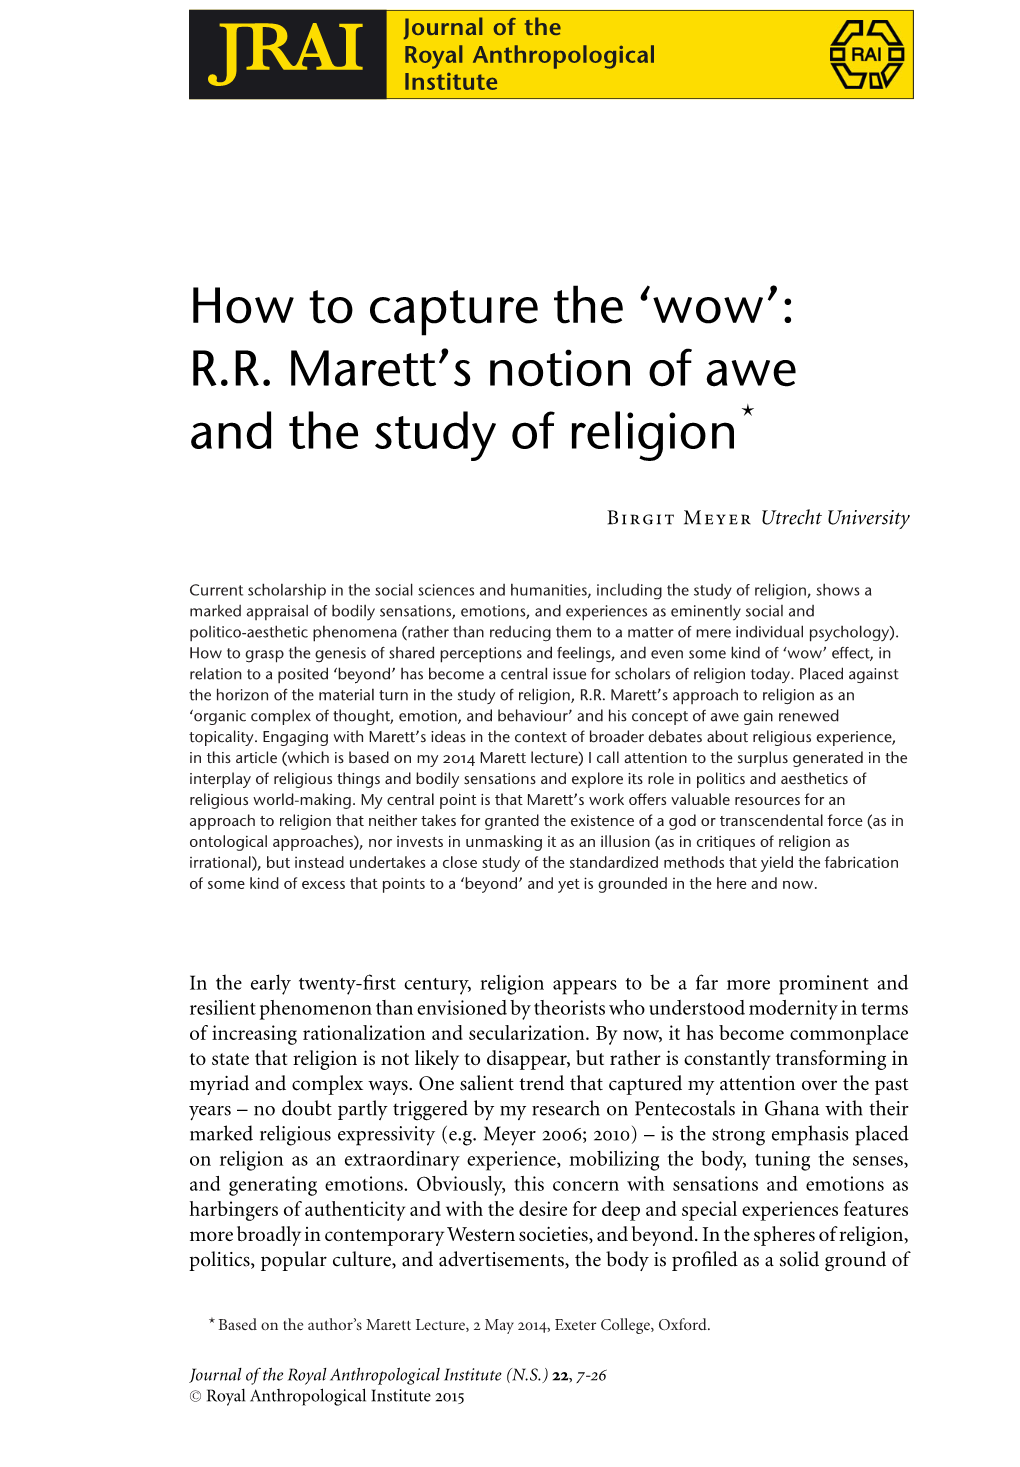 'Wow': RR Marett's Notion of Awe and the Study of Religion